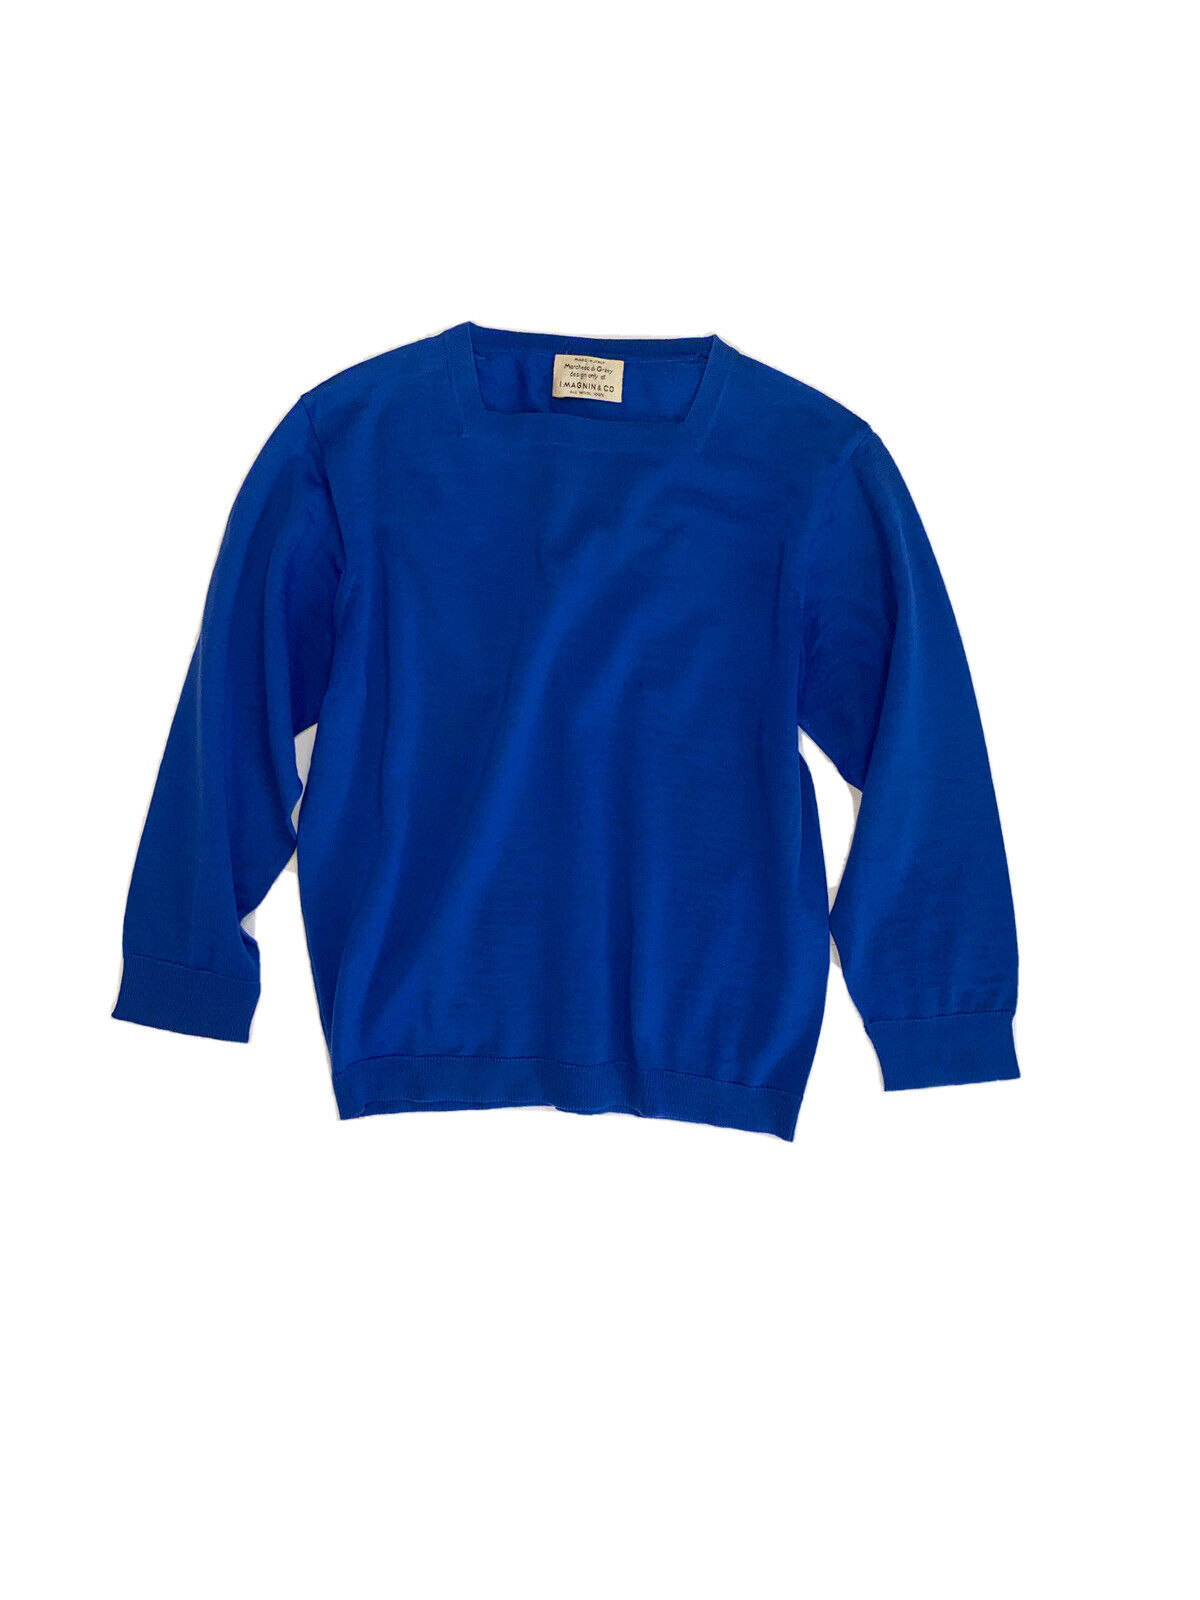 Marchesa I.Magnin Vintage 50s Wool Sweater Women Royal Blue Square Neck Knit Top